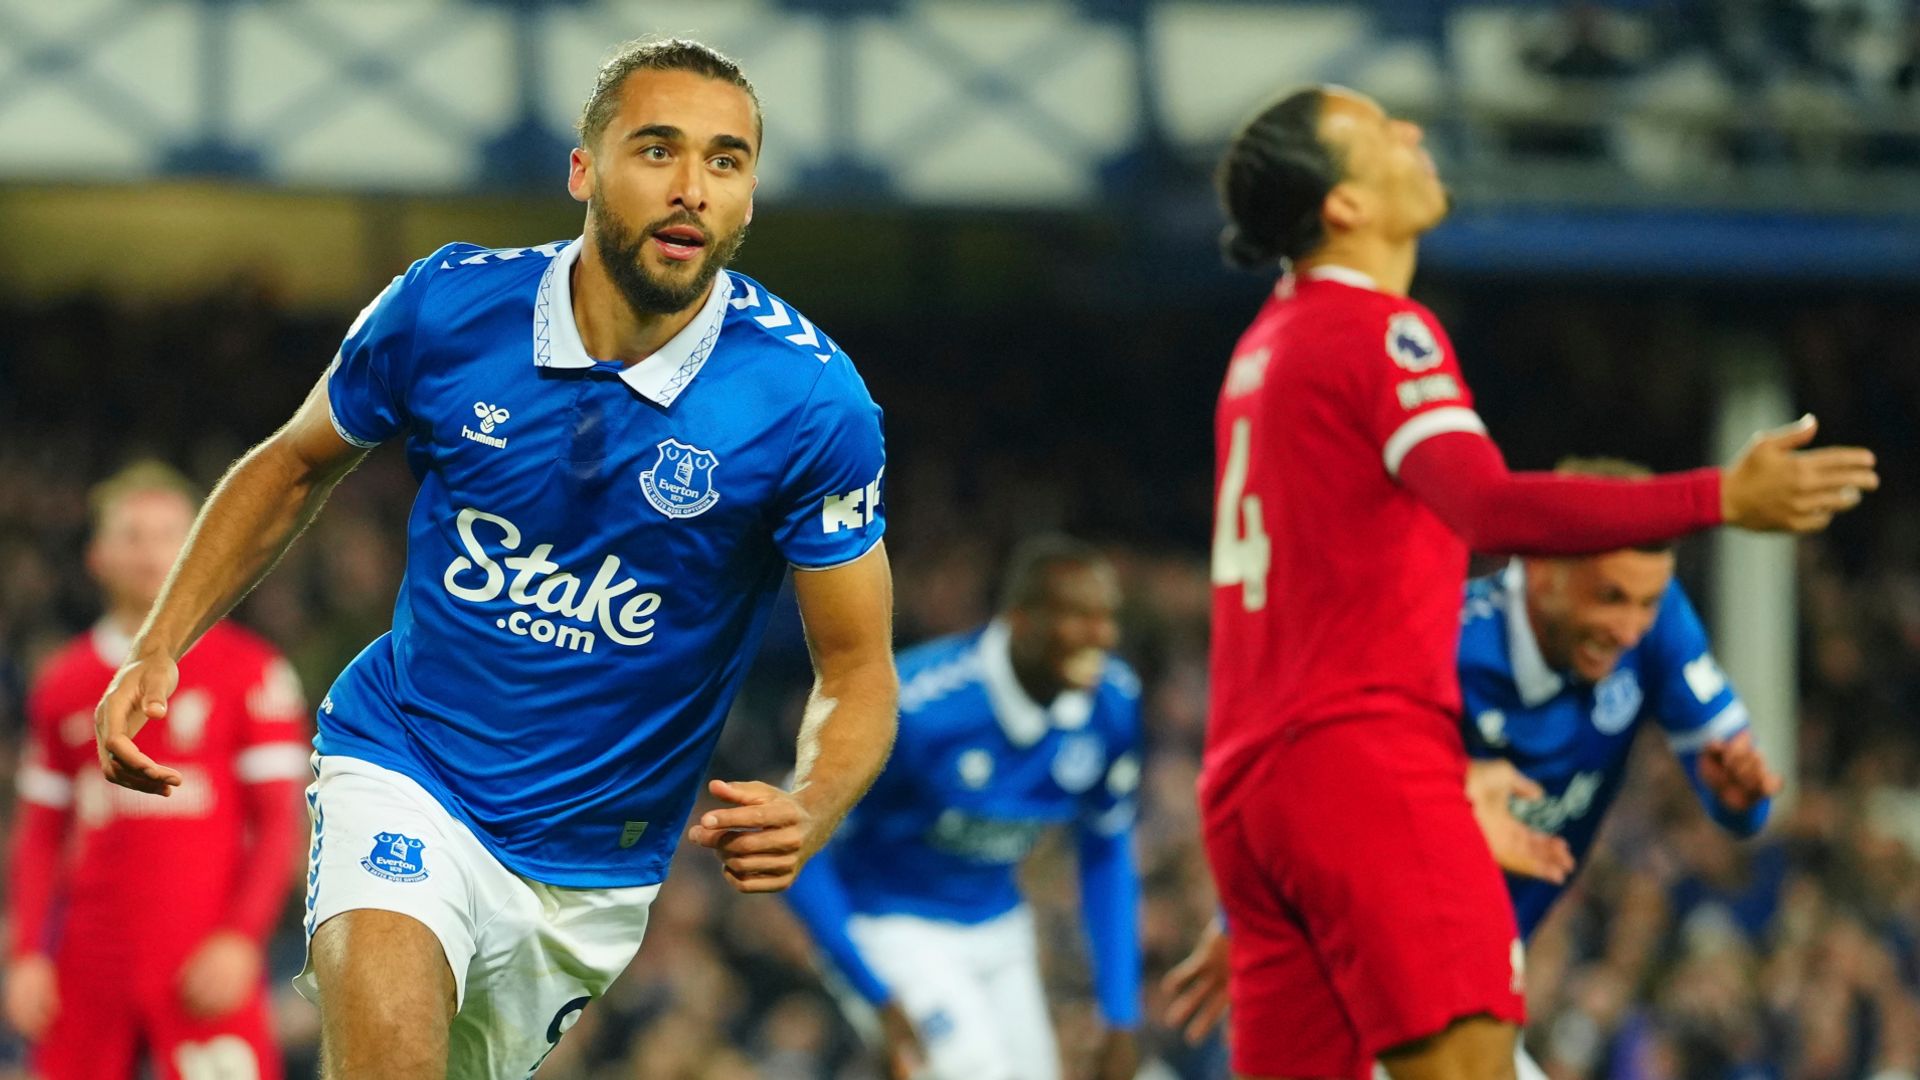 'It feels like the end': Everton stun Liverpool - reaction LIVE!